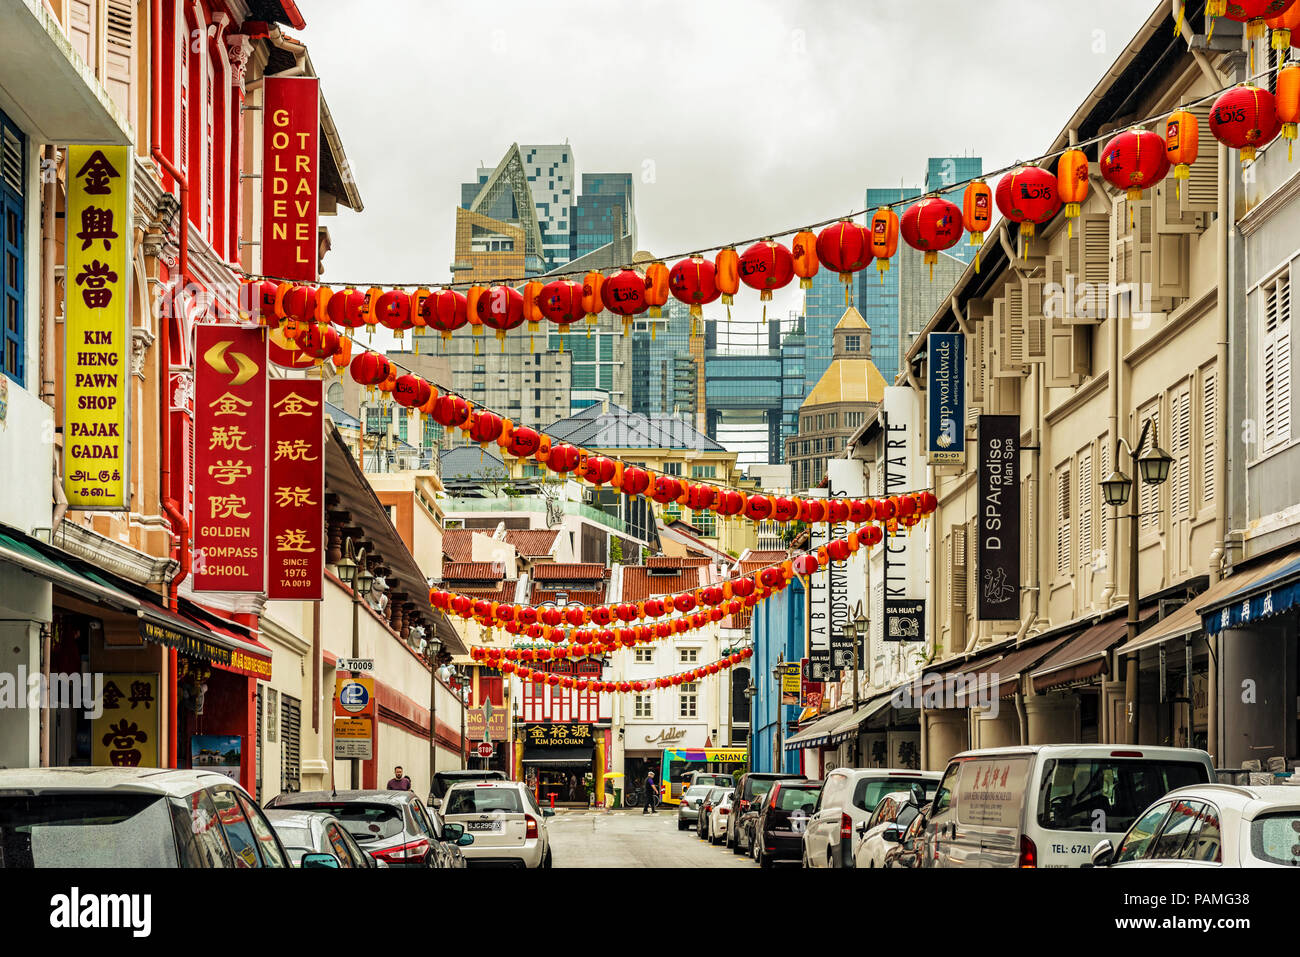 Singapore - January 12, 2018: Traffic at the street with the old colonial houses in the part of Singapore called Chinatown. Stock Photo